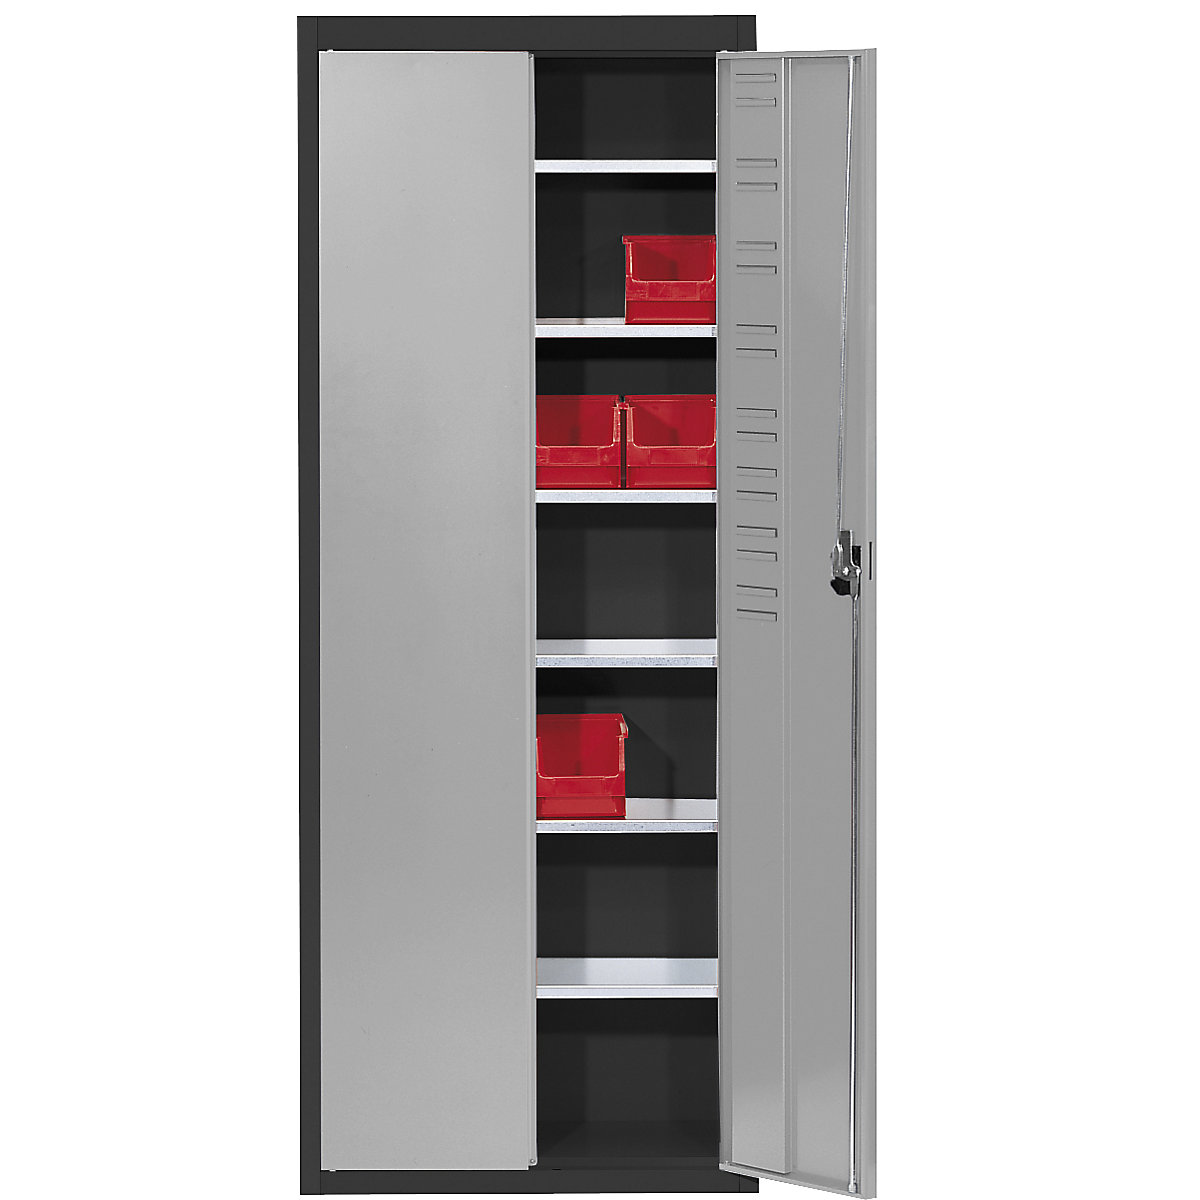 Storage cupboard, without open fronted storage bins – mauser, HxWxD 1740 x 680 x 280 mm, two-colour, black body, grey doors-6